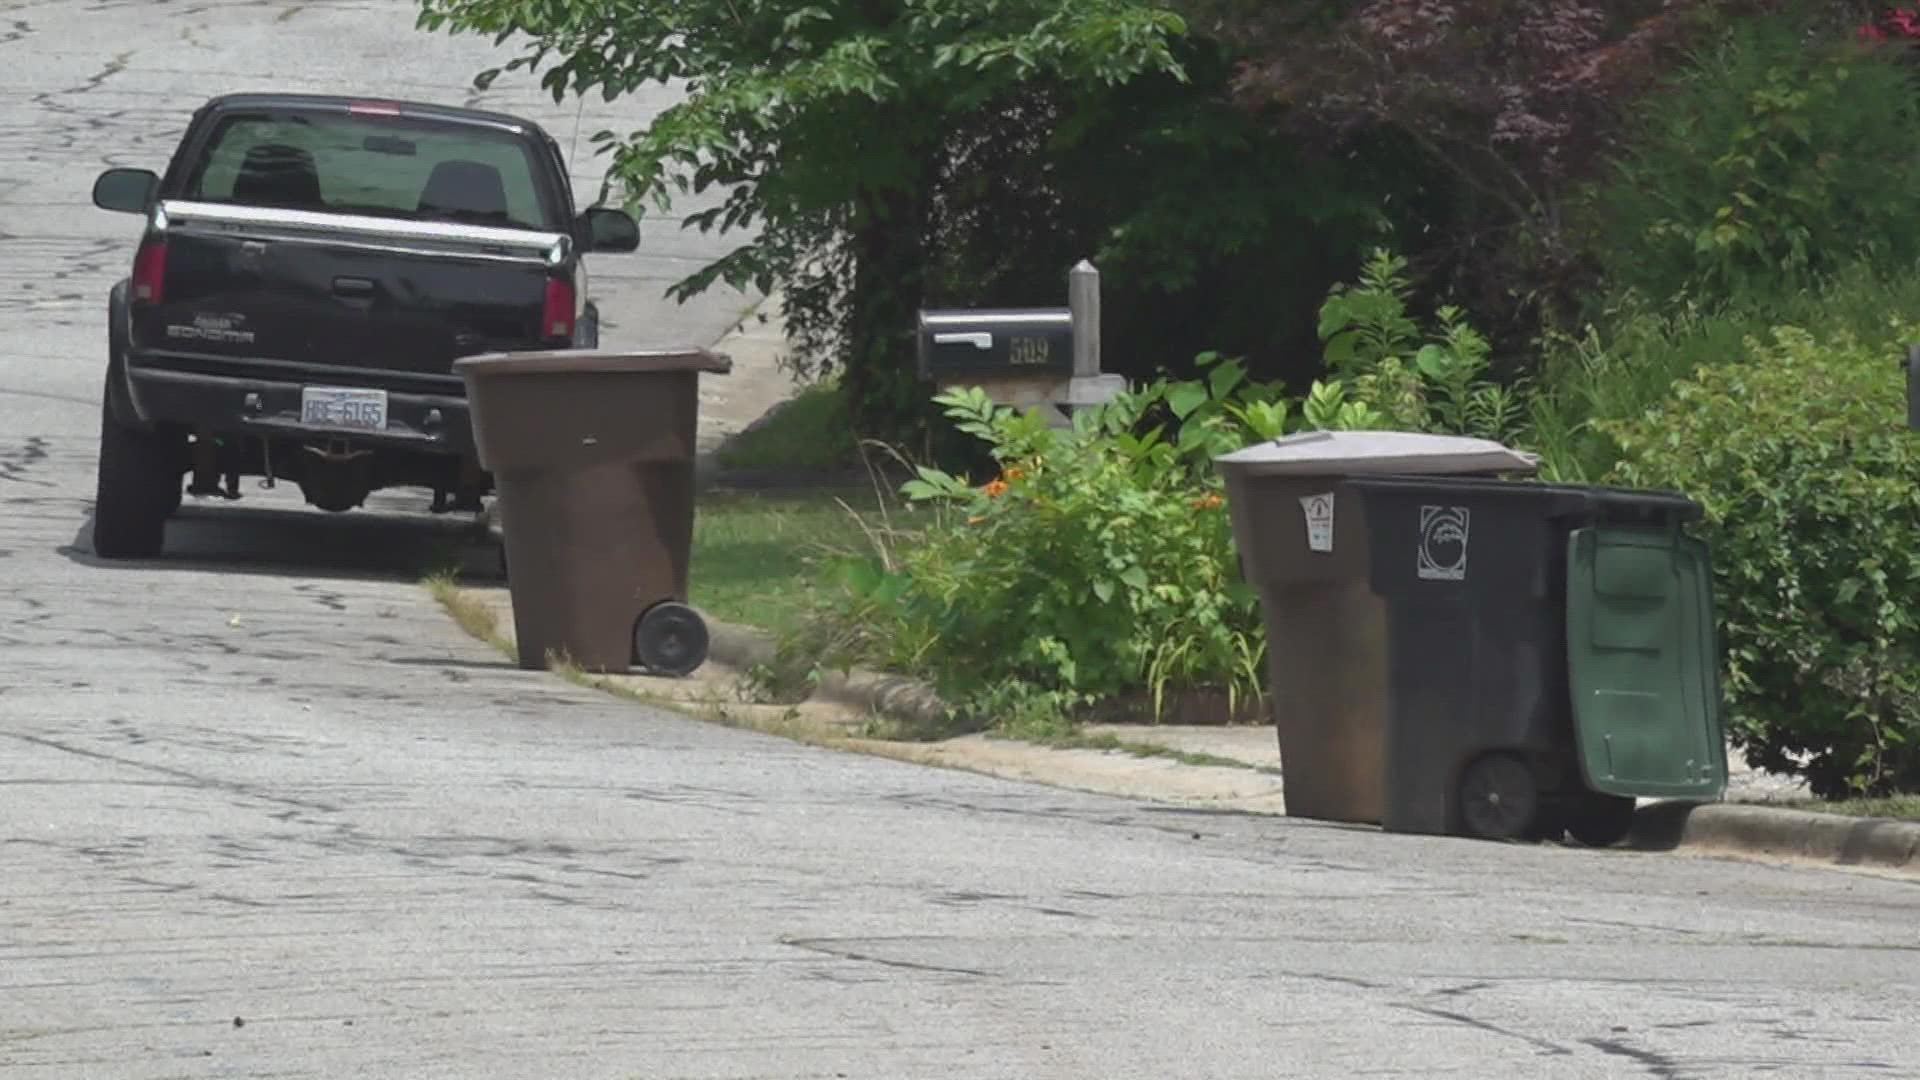 The city of Greensboro said all containers must be pulled back from the curbside by 7 p.m. on your pickup day.